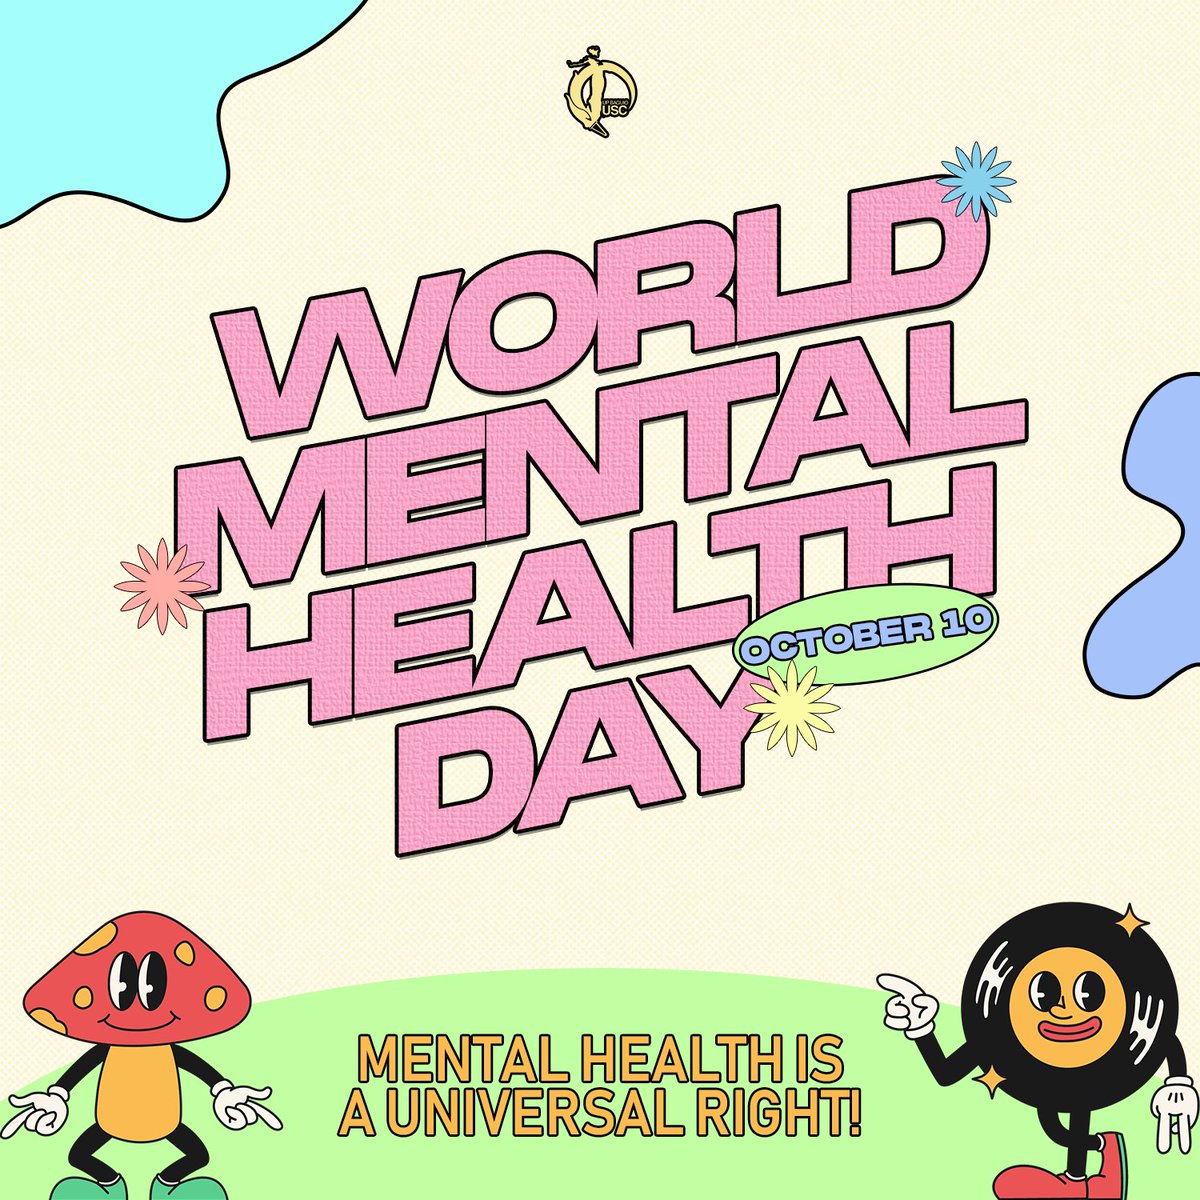 ✨𝑴𝑬𝑵𝑻𝑨𝑳 𝑯𝑬𝑨𝑳𝑻𝑯 𝑰𝑺 𝑨 𝑼𝑵𝑰𝑽𝑬𝑹𝑺𝑨𝑳 𝑹𝑰𝑮𝑯𝑻✨

Yesterday, October 10, the global community celebrates the #WorldMentalHealthDay2023 with the theme:  ‘Mental health is a universal human right’. 🌍